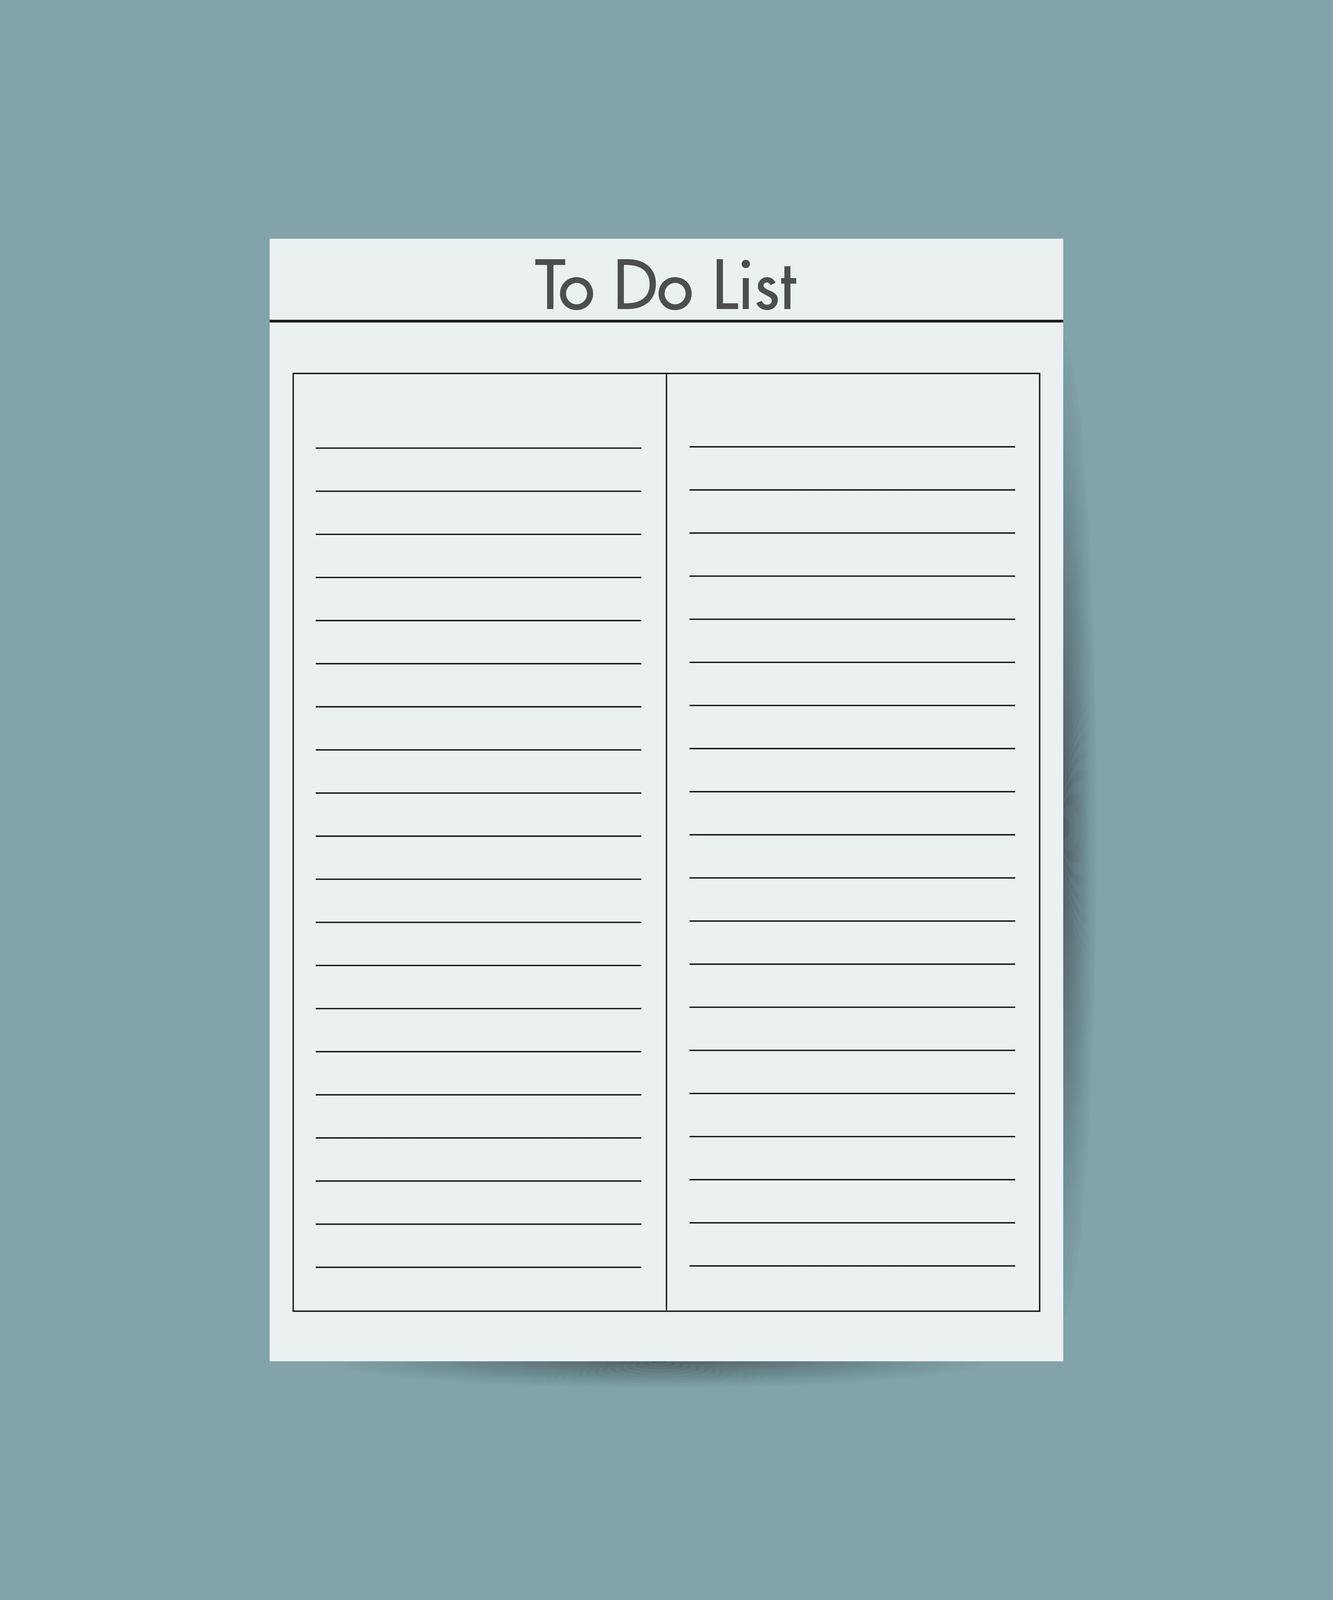 To do list, agenda, planner paper. Flat isolated icon on gray background by ANITA